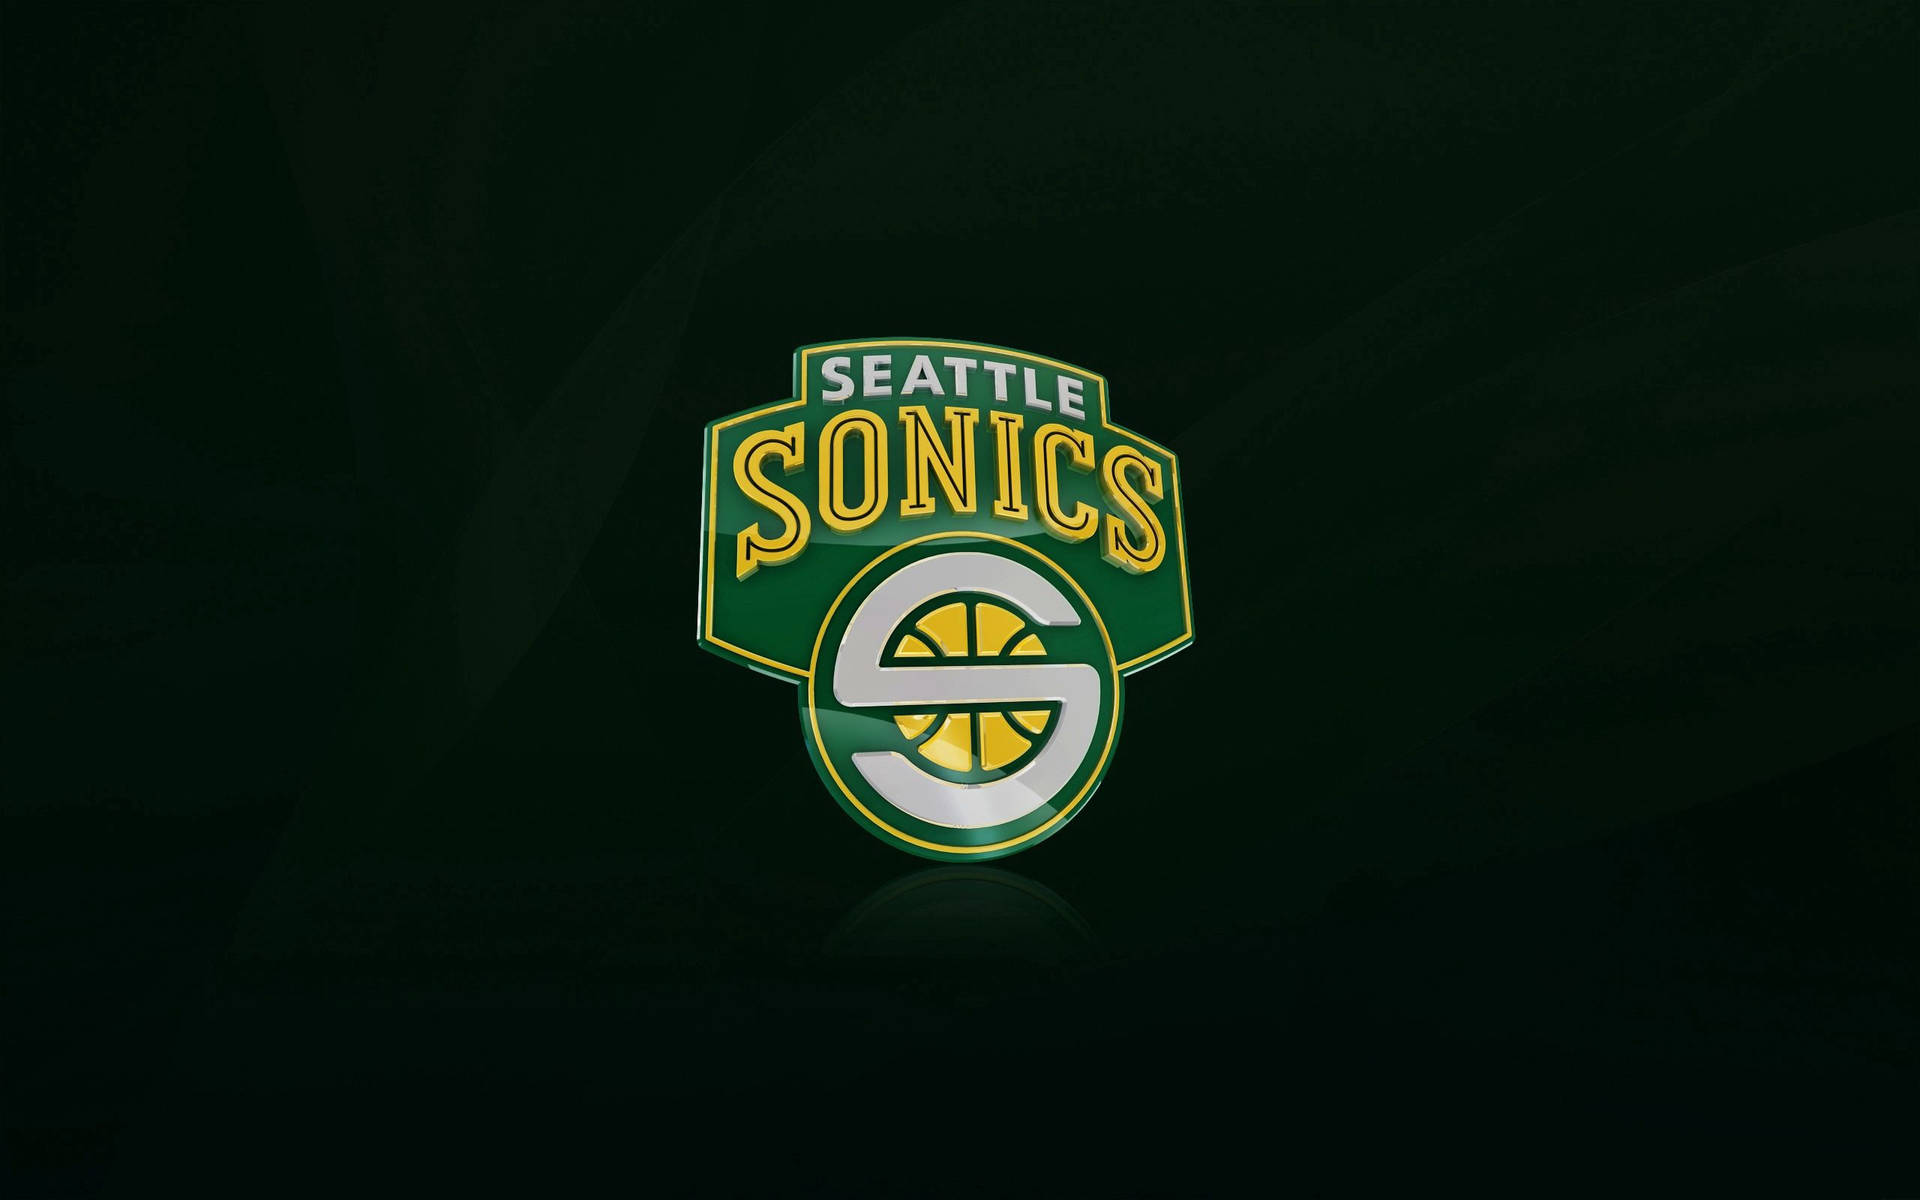 Representing the Seattle Supersonics and the city of Seattle, this classic NBA logo will always remain iconic. Wallpaper